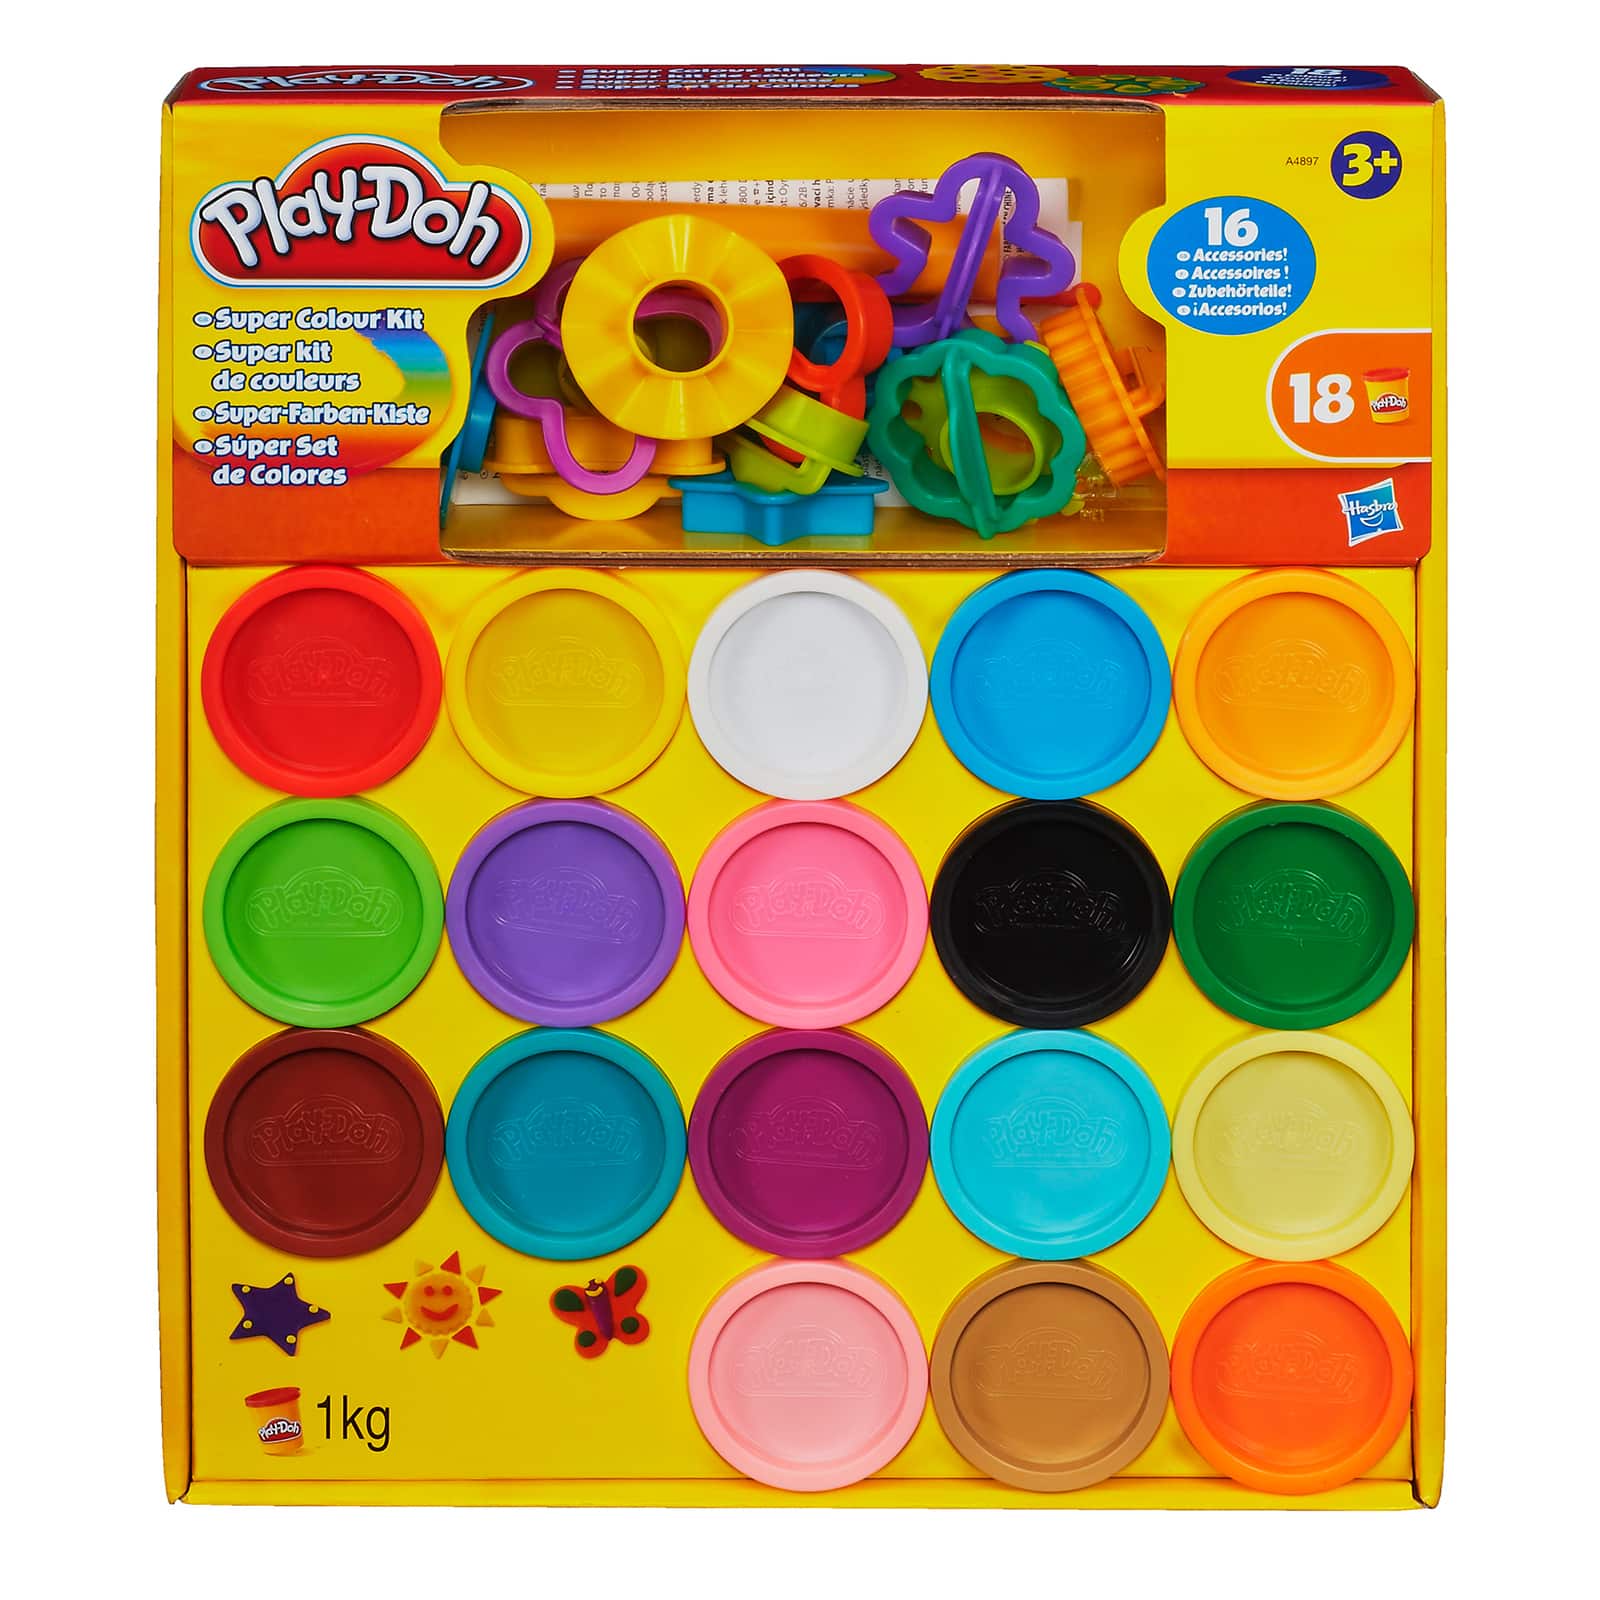 4 colors play doh